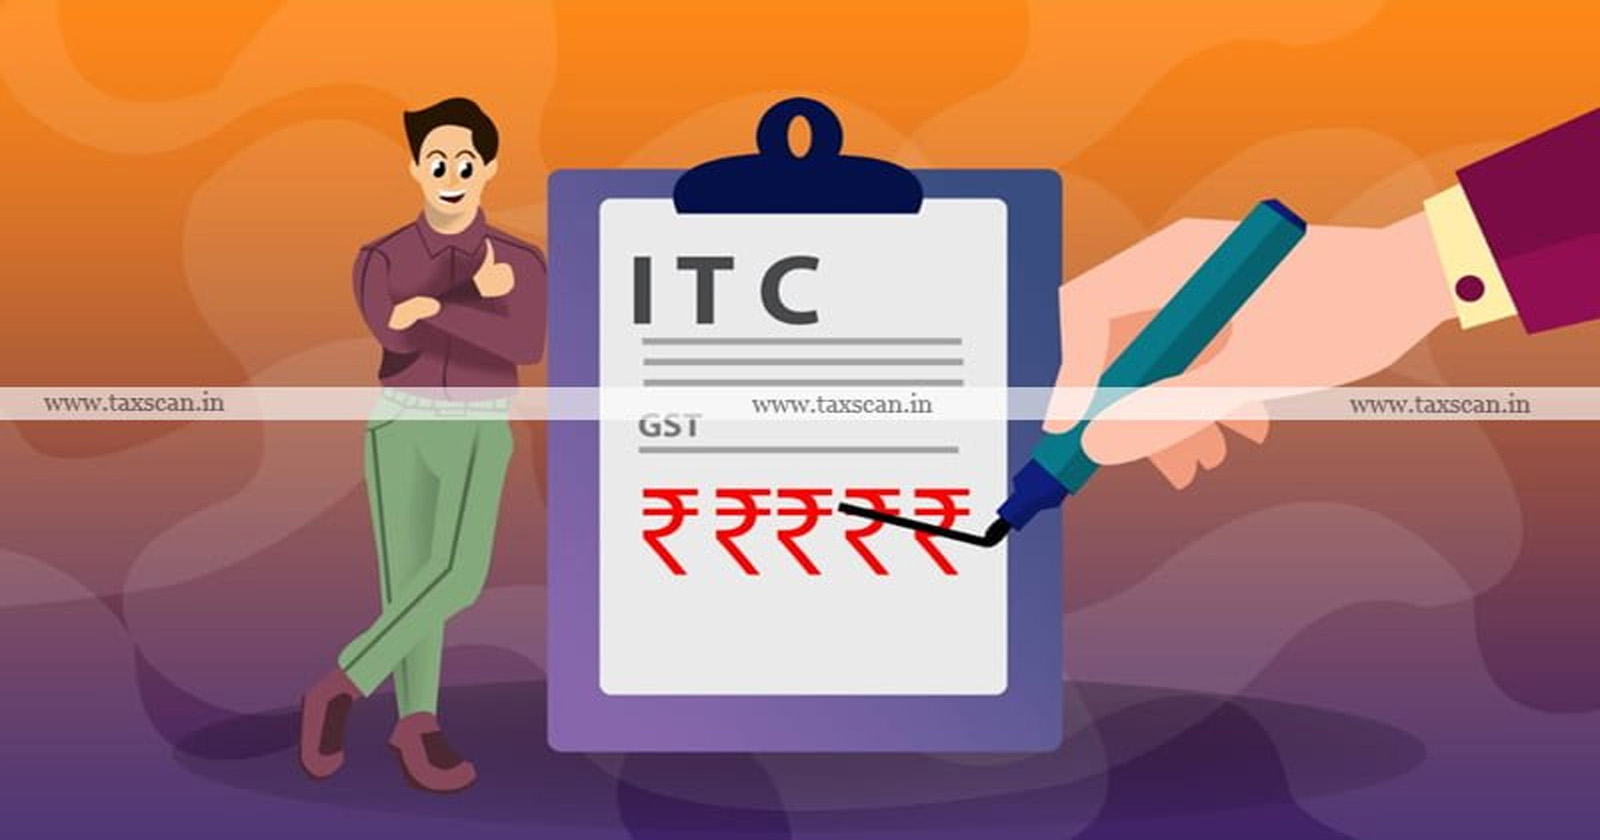 CBIC - CBIC notifies new Rule - CBIC notifies new Rule for Manner of dealing with difference in ITC - ITC dealing with difference - taxscan